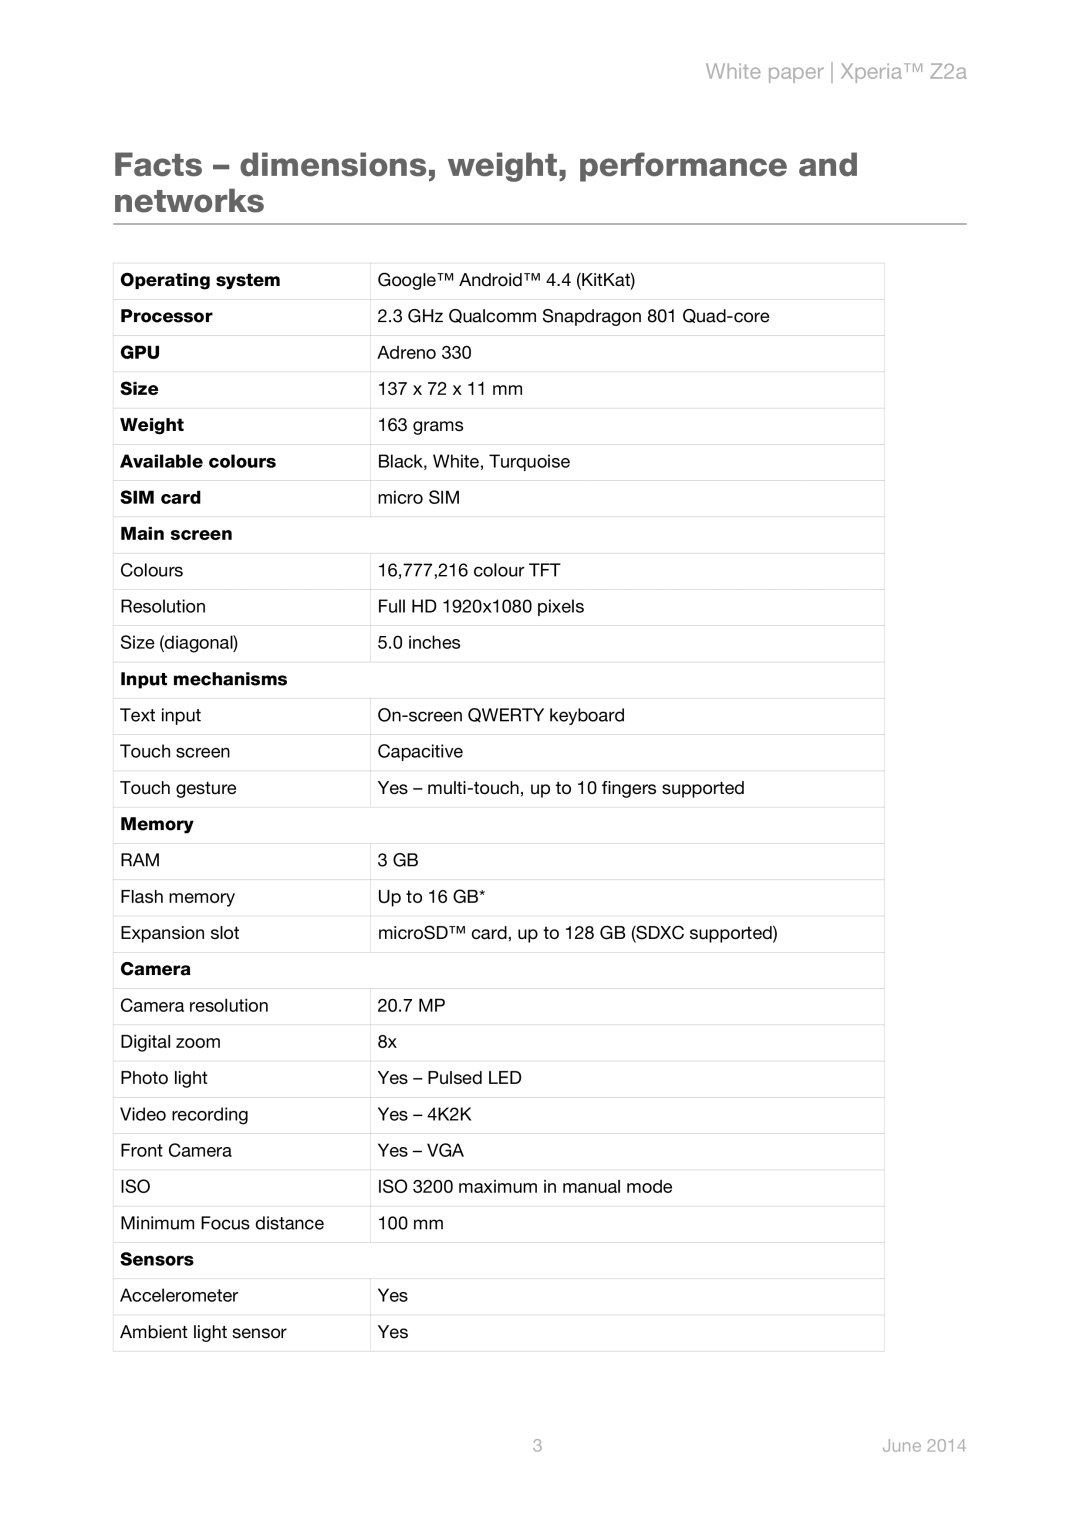 Sony manual Facts - dimensions, weight, performance and networks, White paper Xperia Z2a, June 